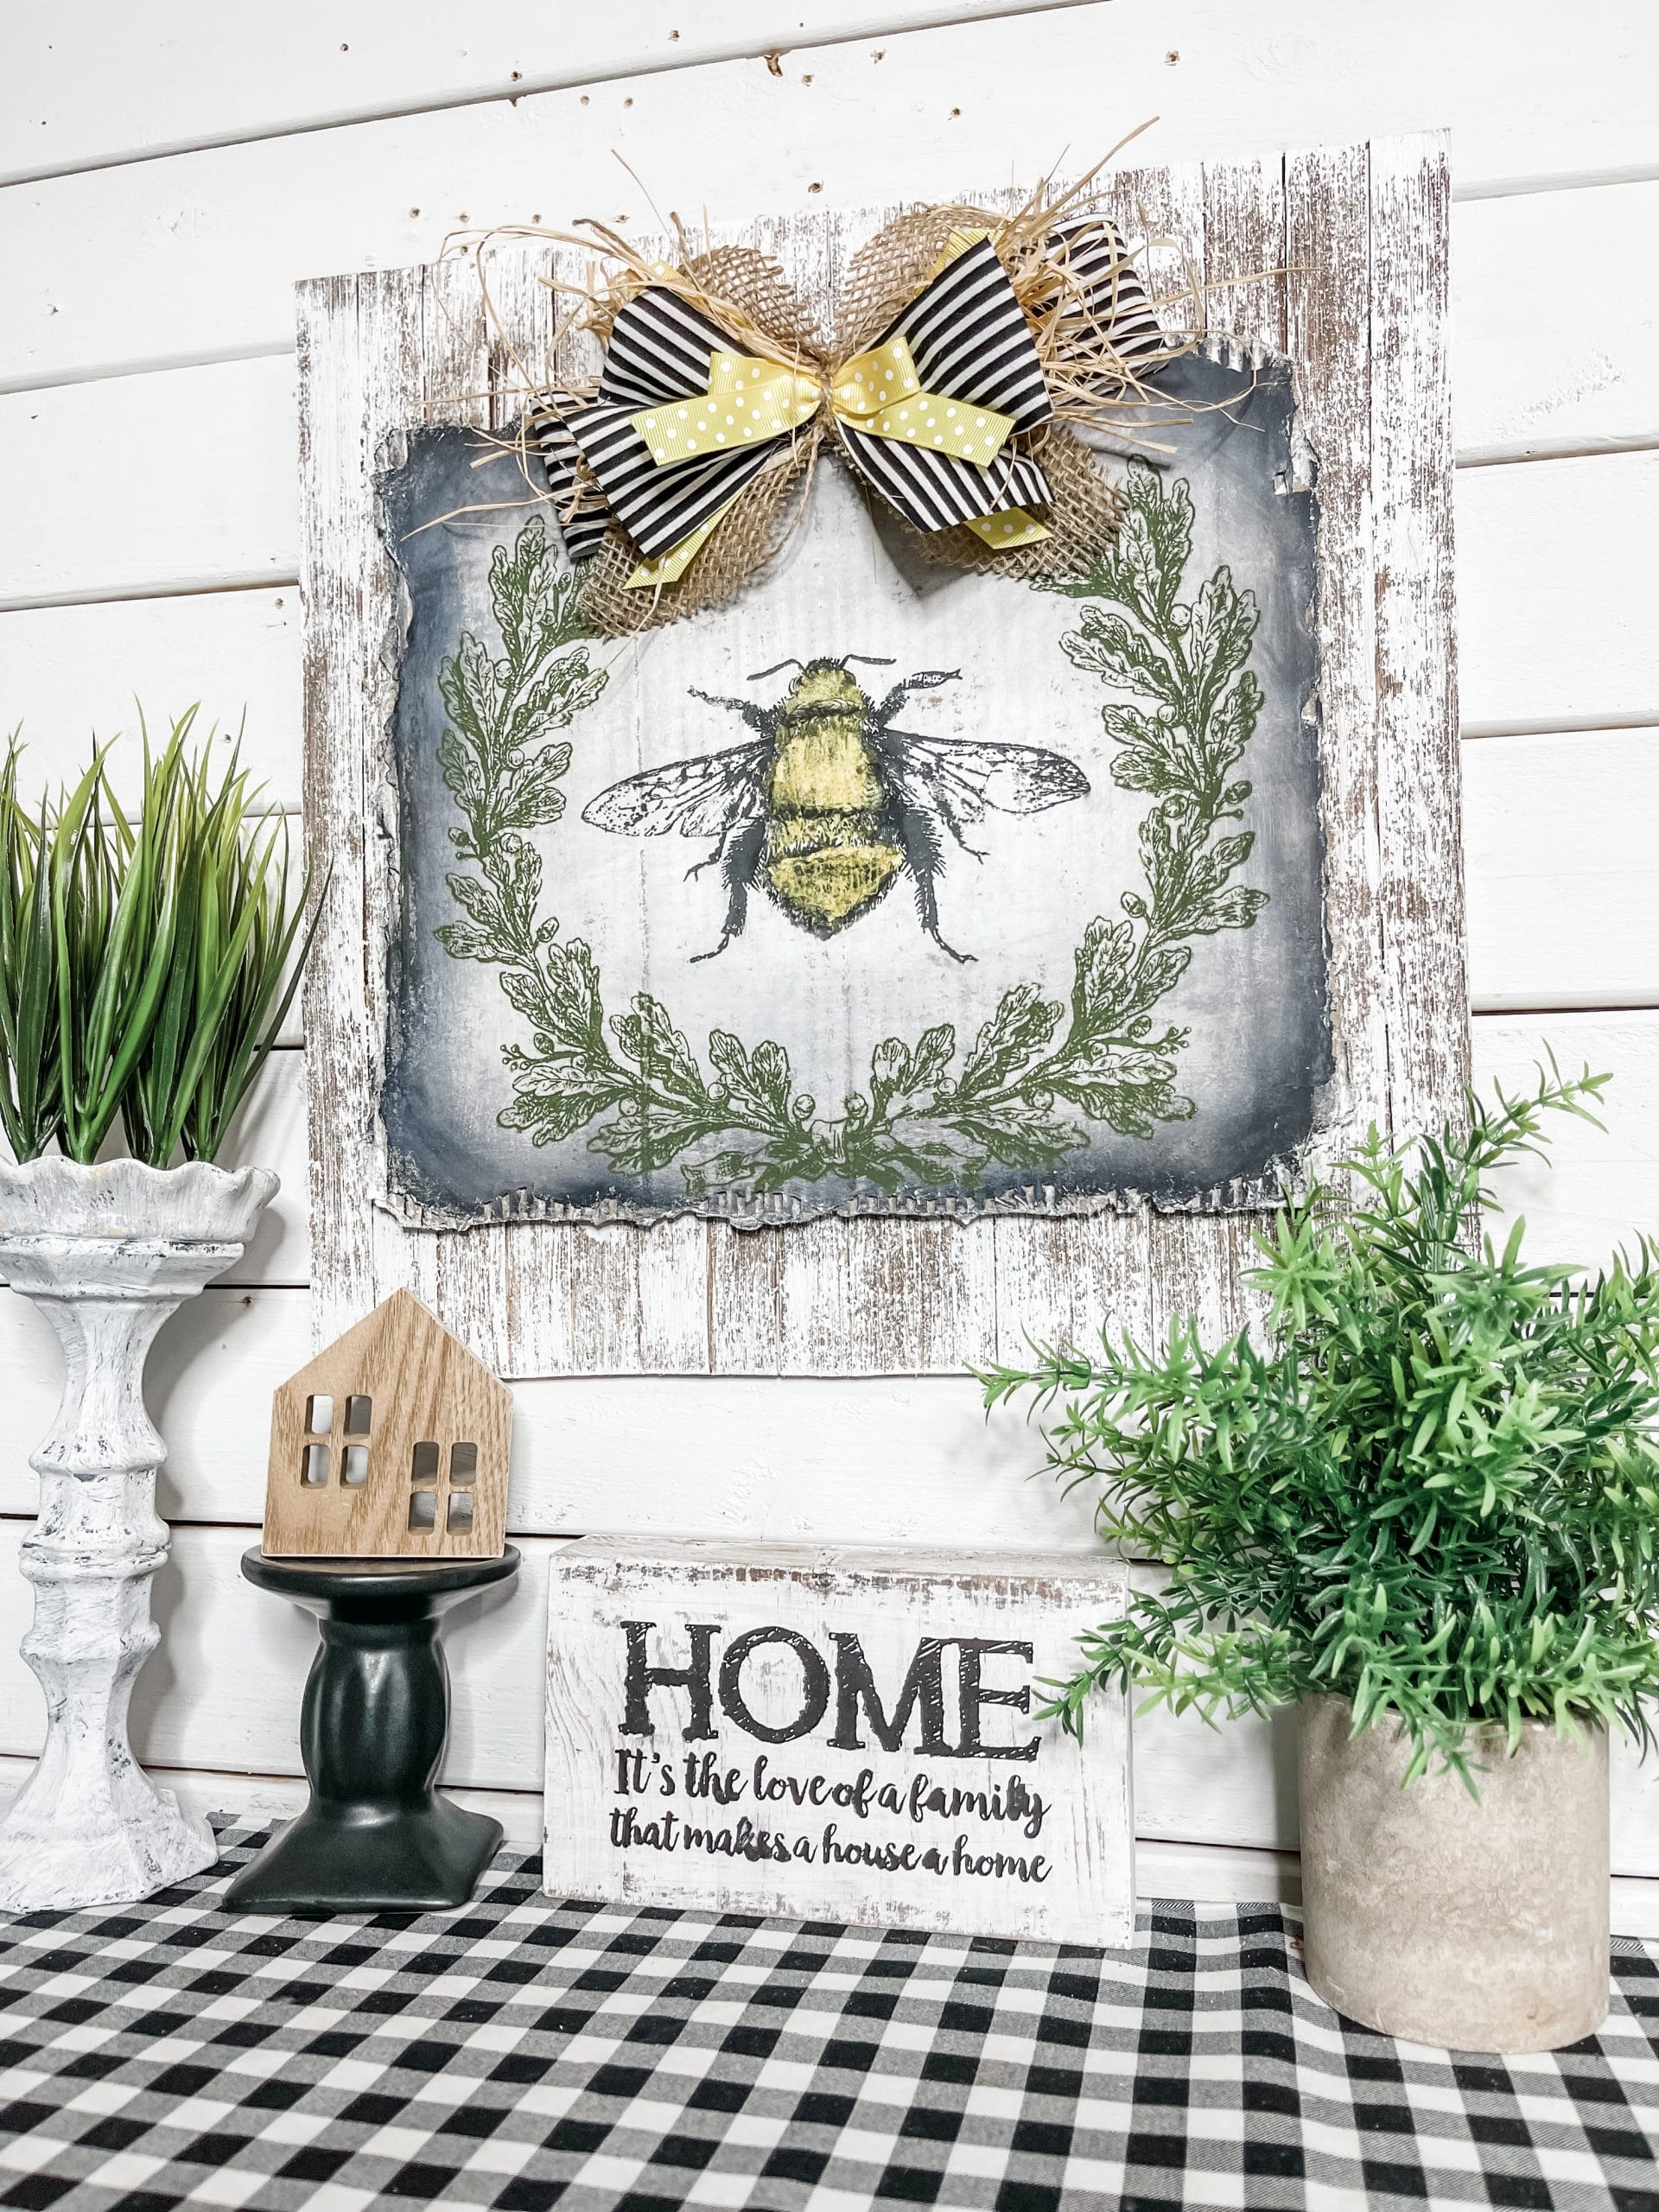 https://www.themakersmap.com/wp-content/uploads/2021/06/farmhouse-bumblebee-decor-scaled.jpg